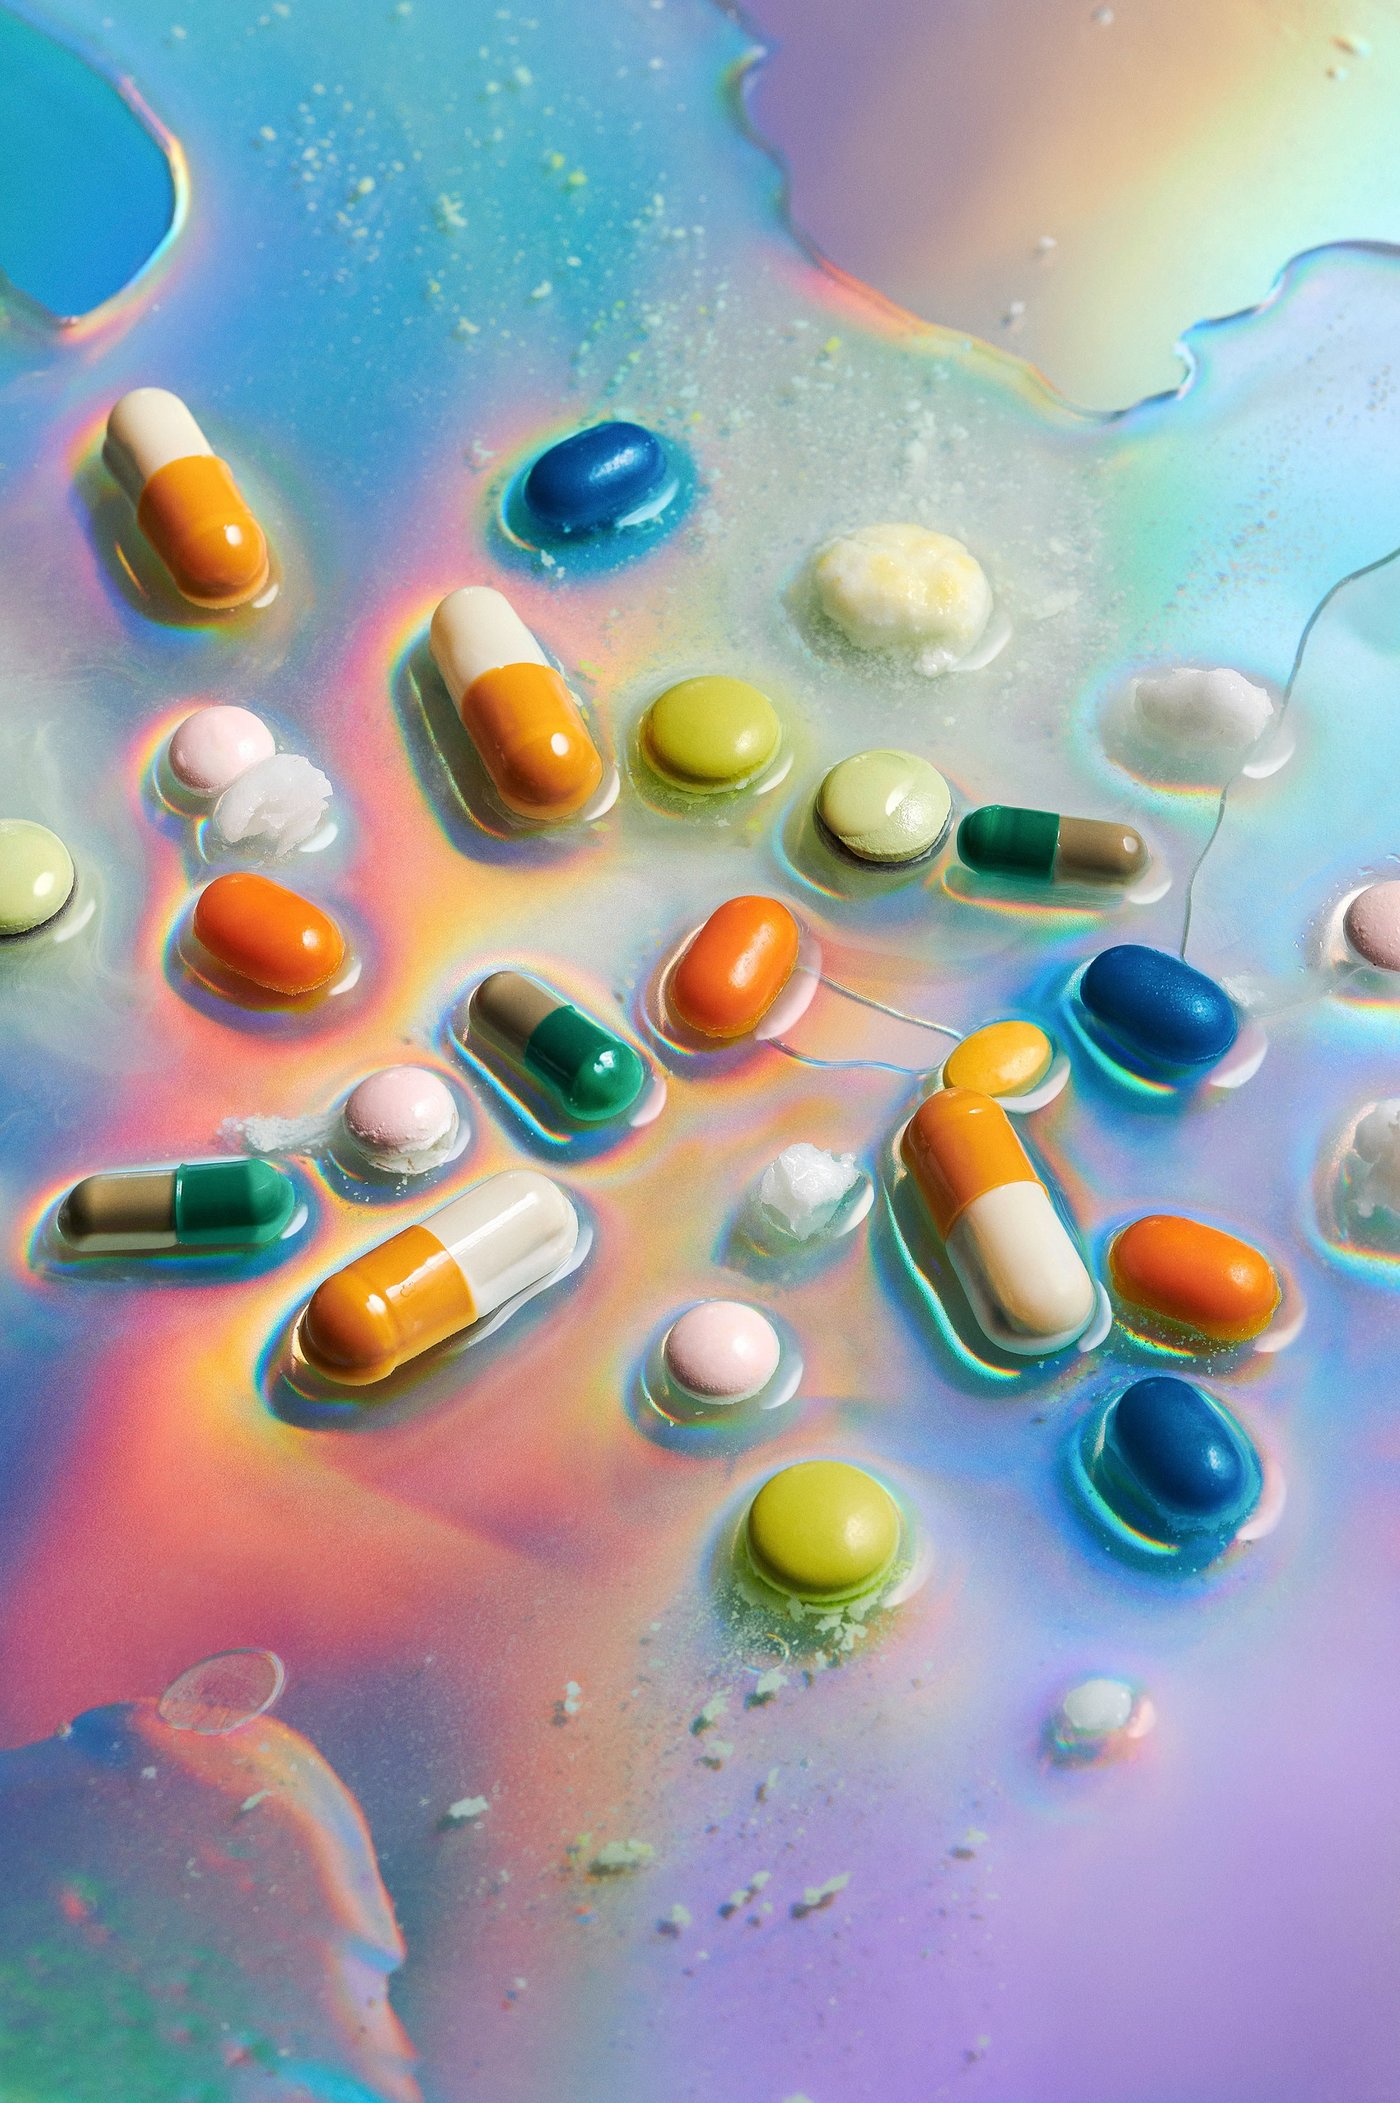 Photo of pills and tablets of different colors lying in transparent liquid. Some are in a state of dissolution. The liquid shimmers colorfully and fluoresces. 